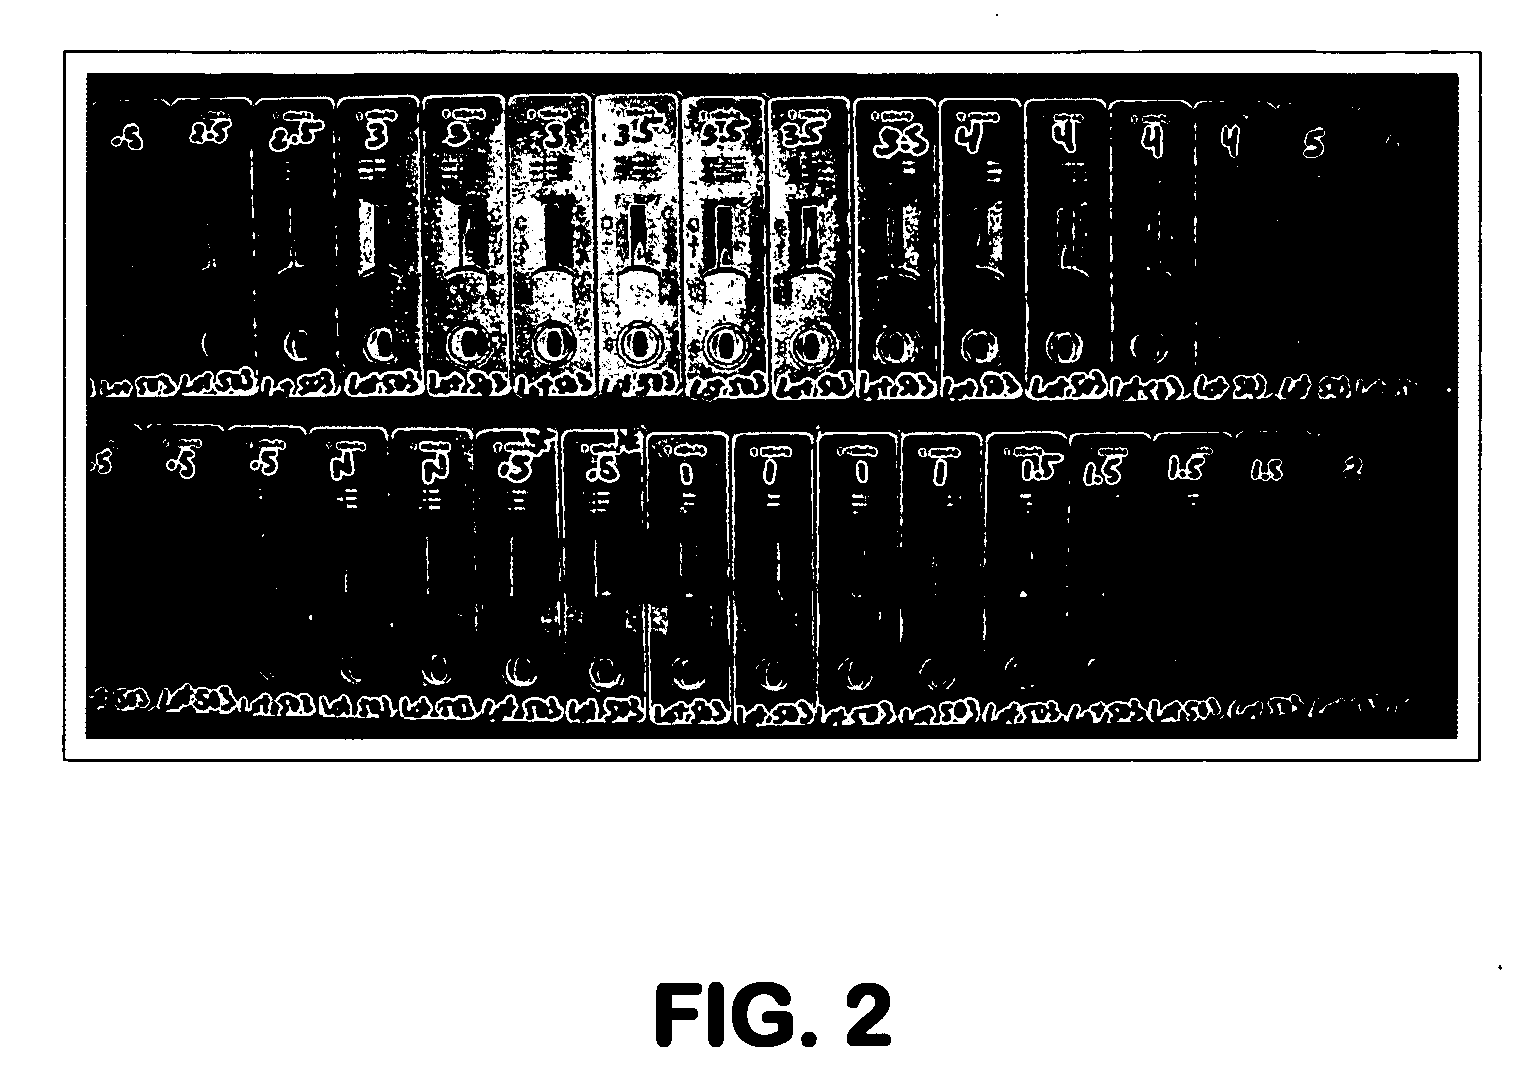 Fluorescence-based lateral flow device with improved sensitivity